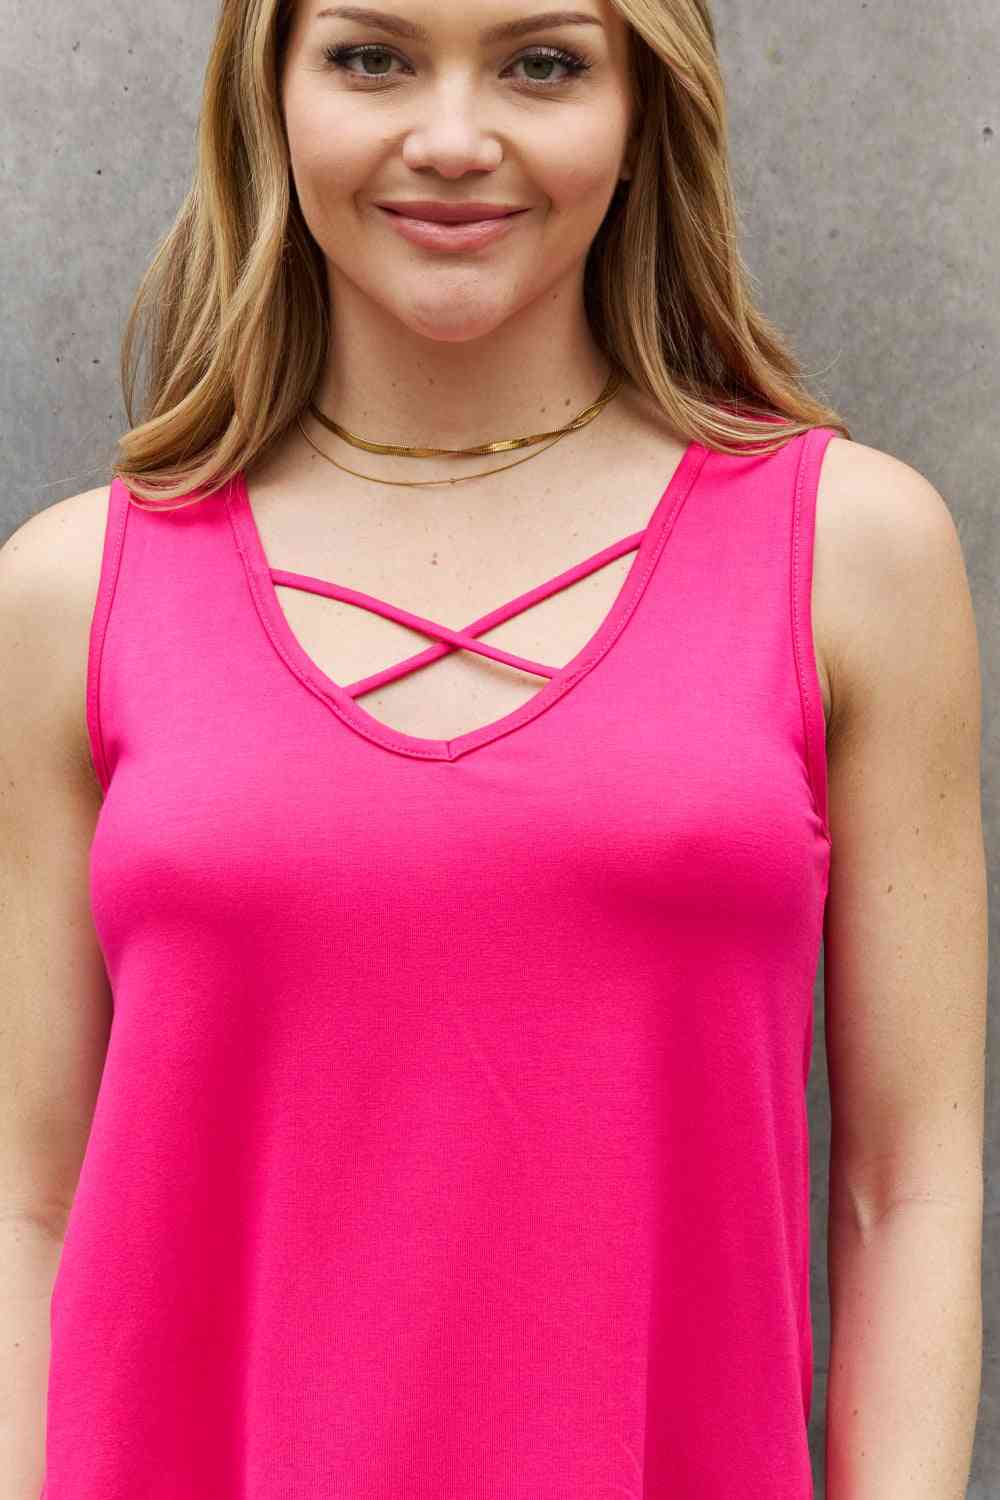 BOMBOM Criss Cross Front Detail Sleeveless Top in Hot Pink - The Teal Antler Boutique